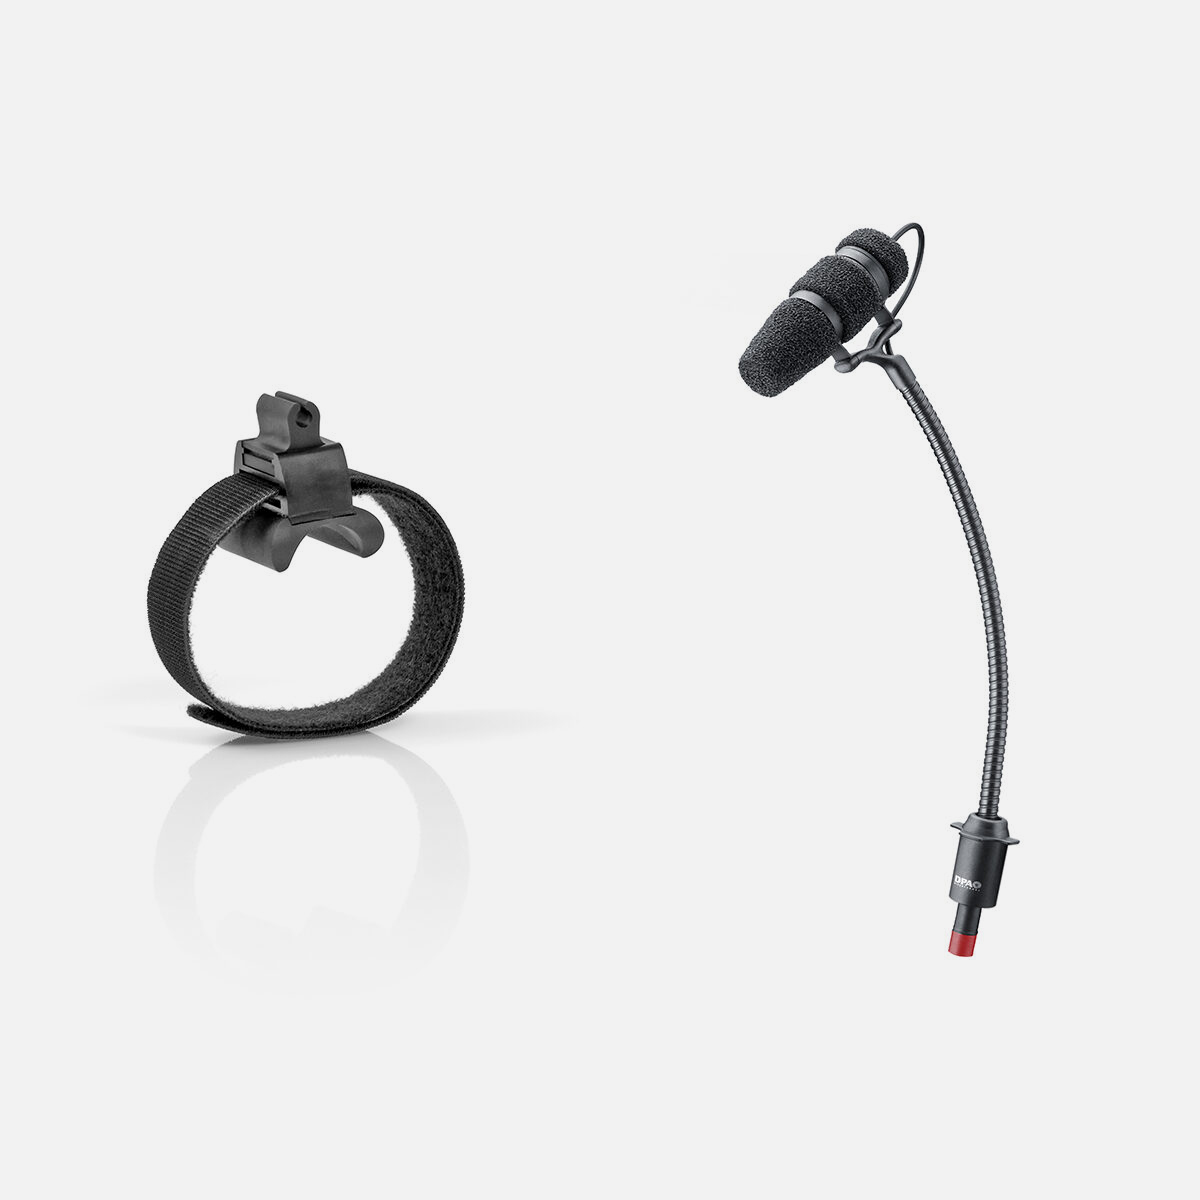 DPA 4099 Instrument Microphone with Universal Mount